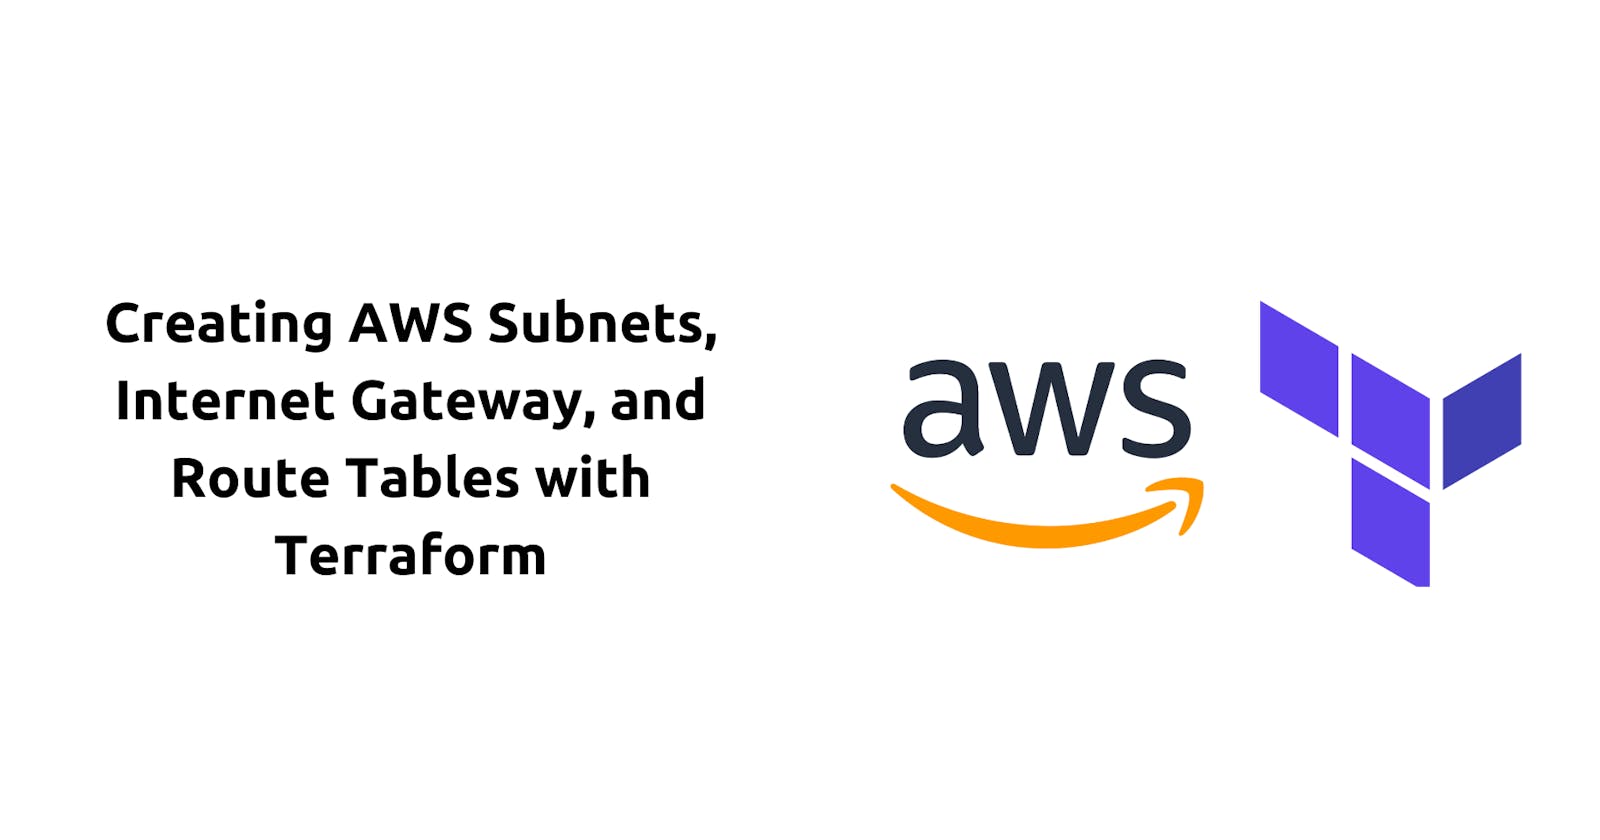 Creating AWS Subnets, Internet Gateway, and Route Tables with Terraform